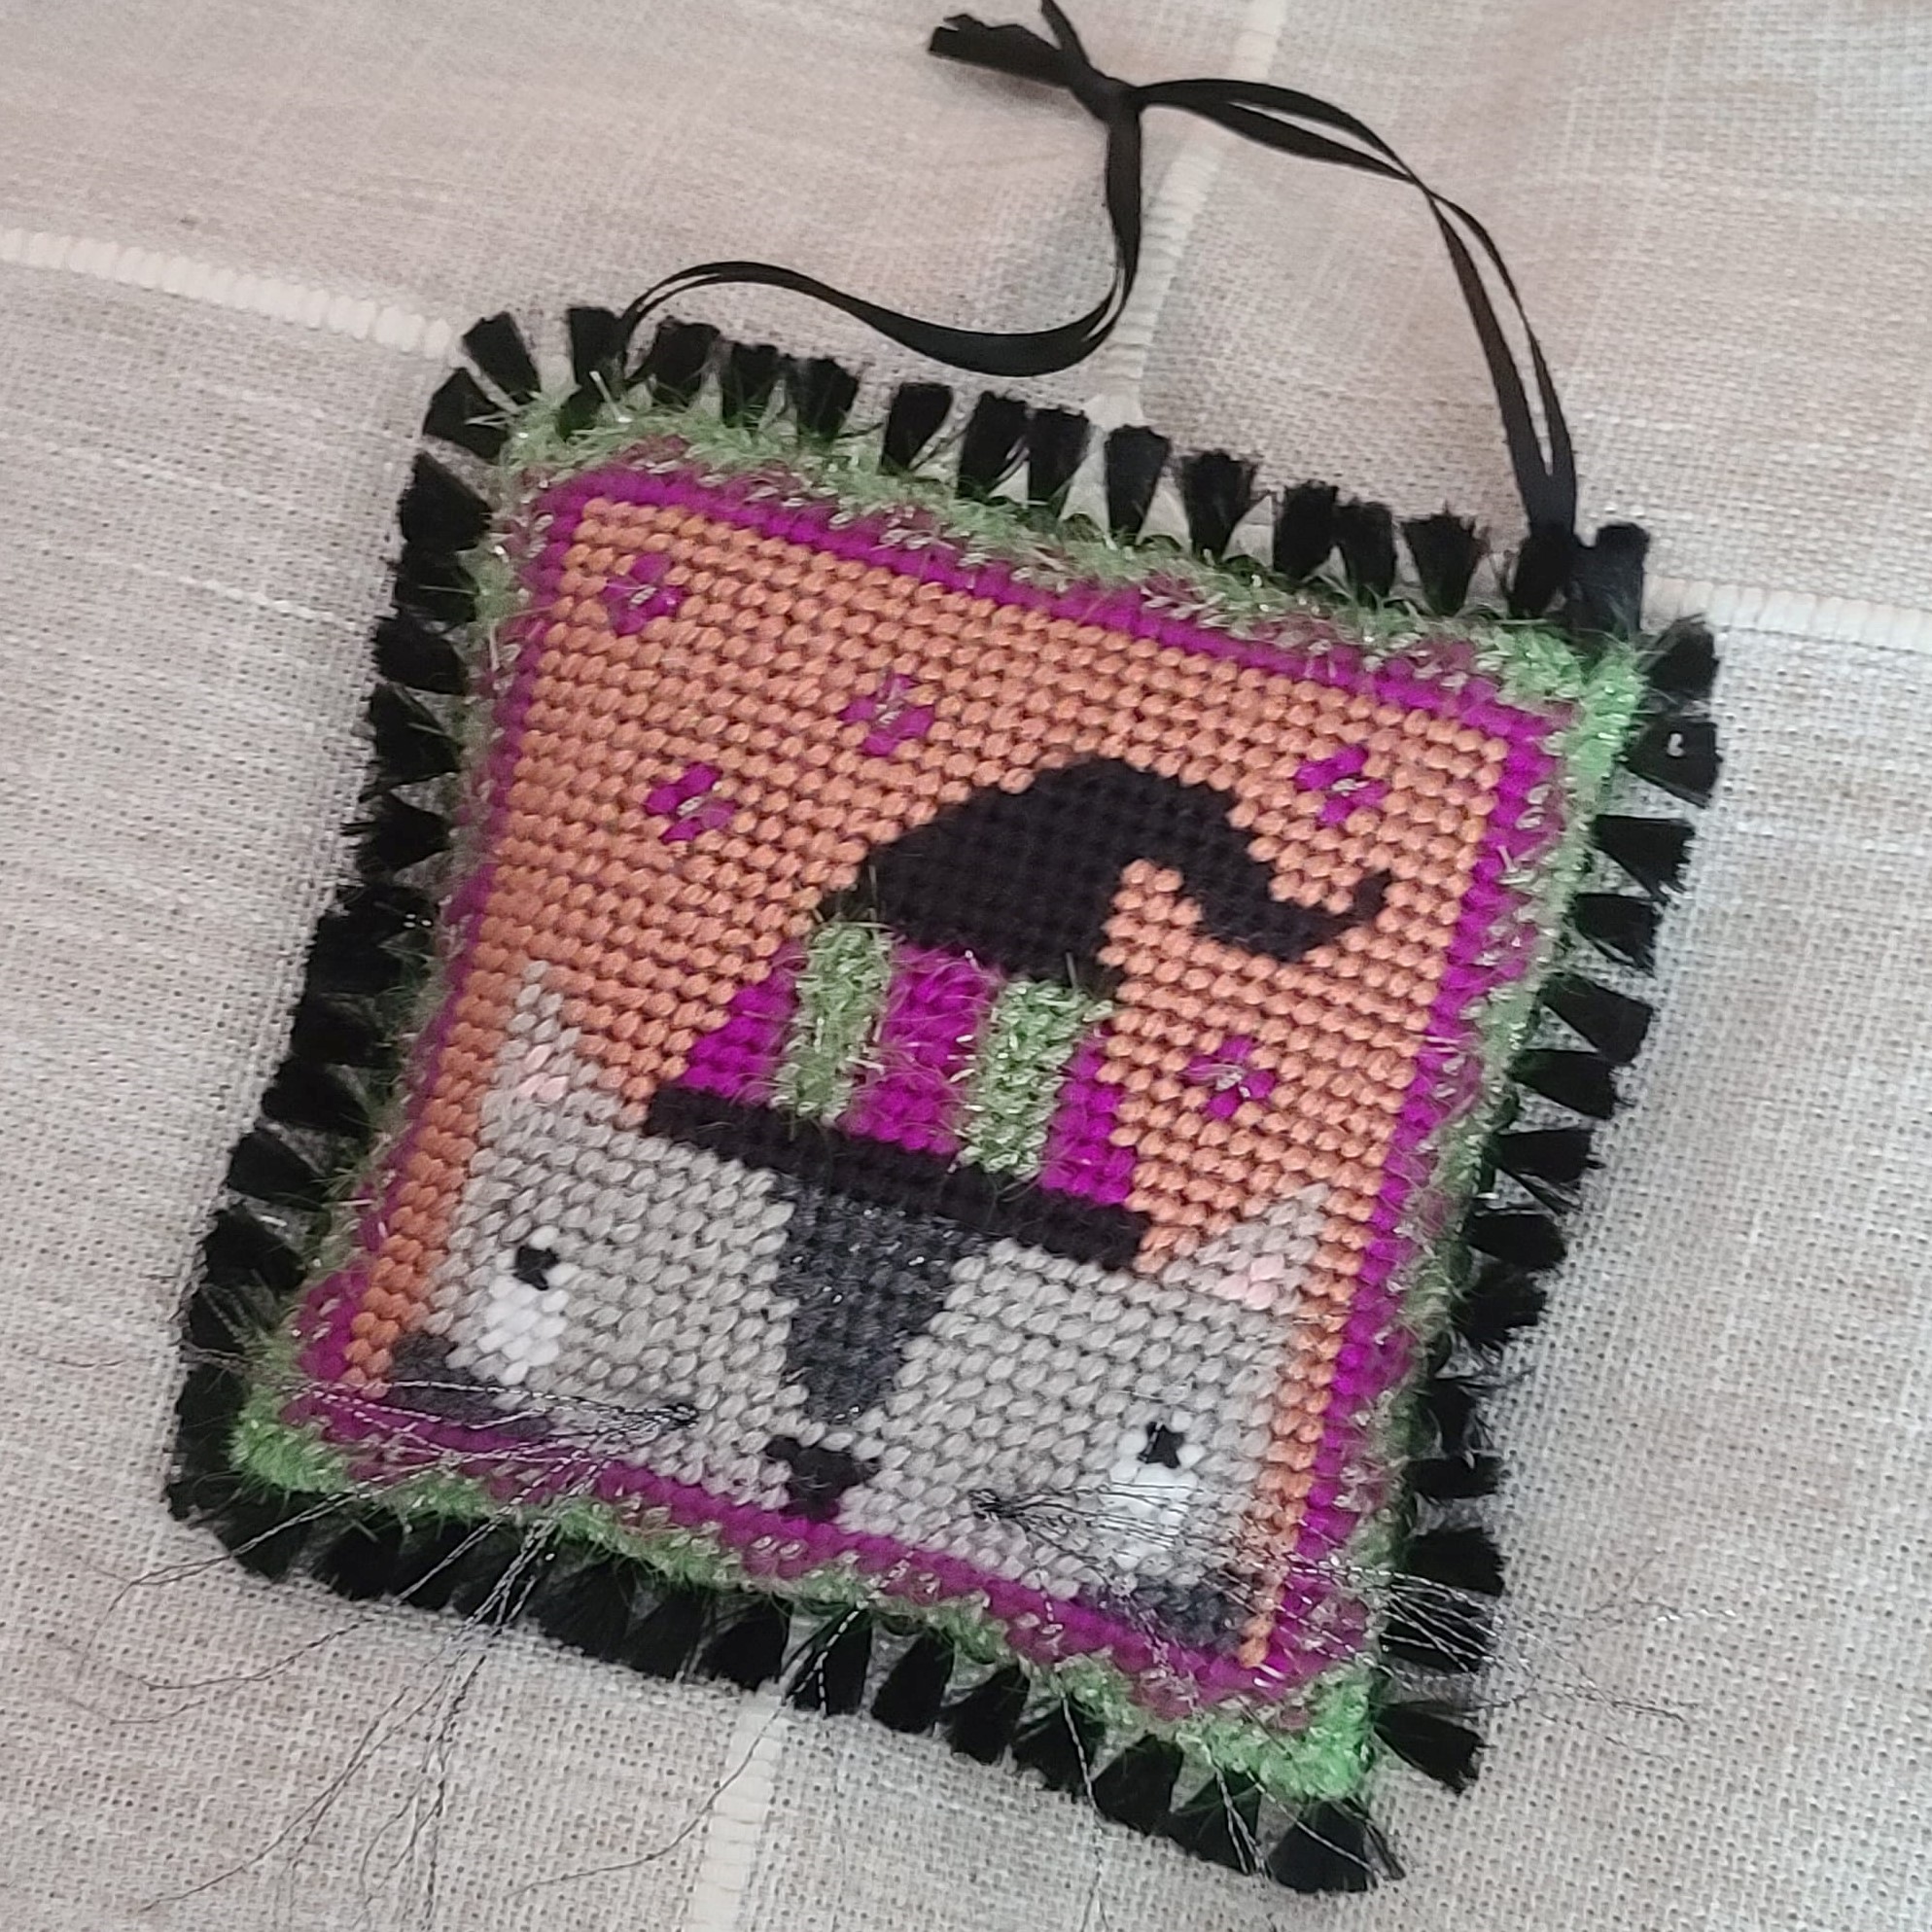 Halloween finished needlepoint Cat with witch hat ornament